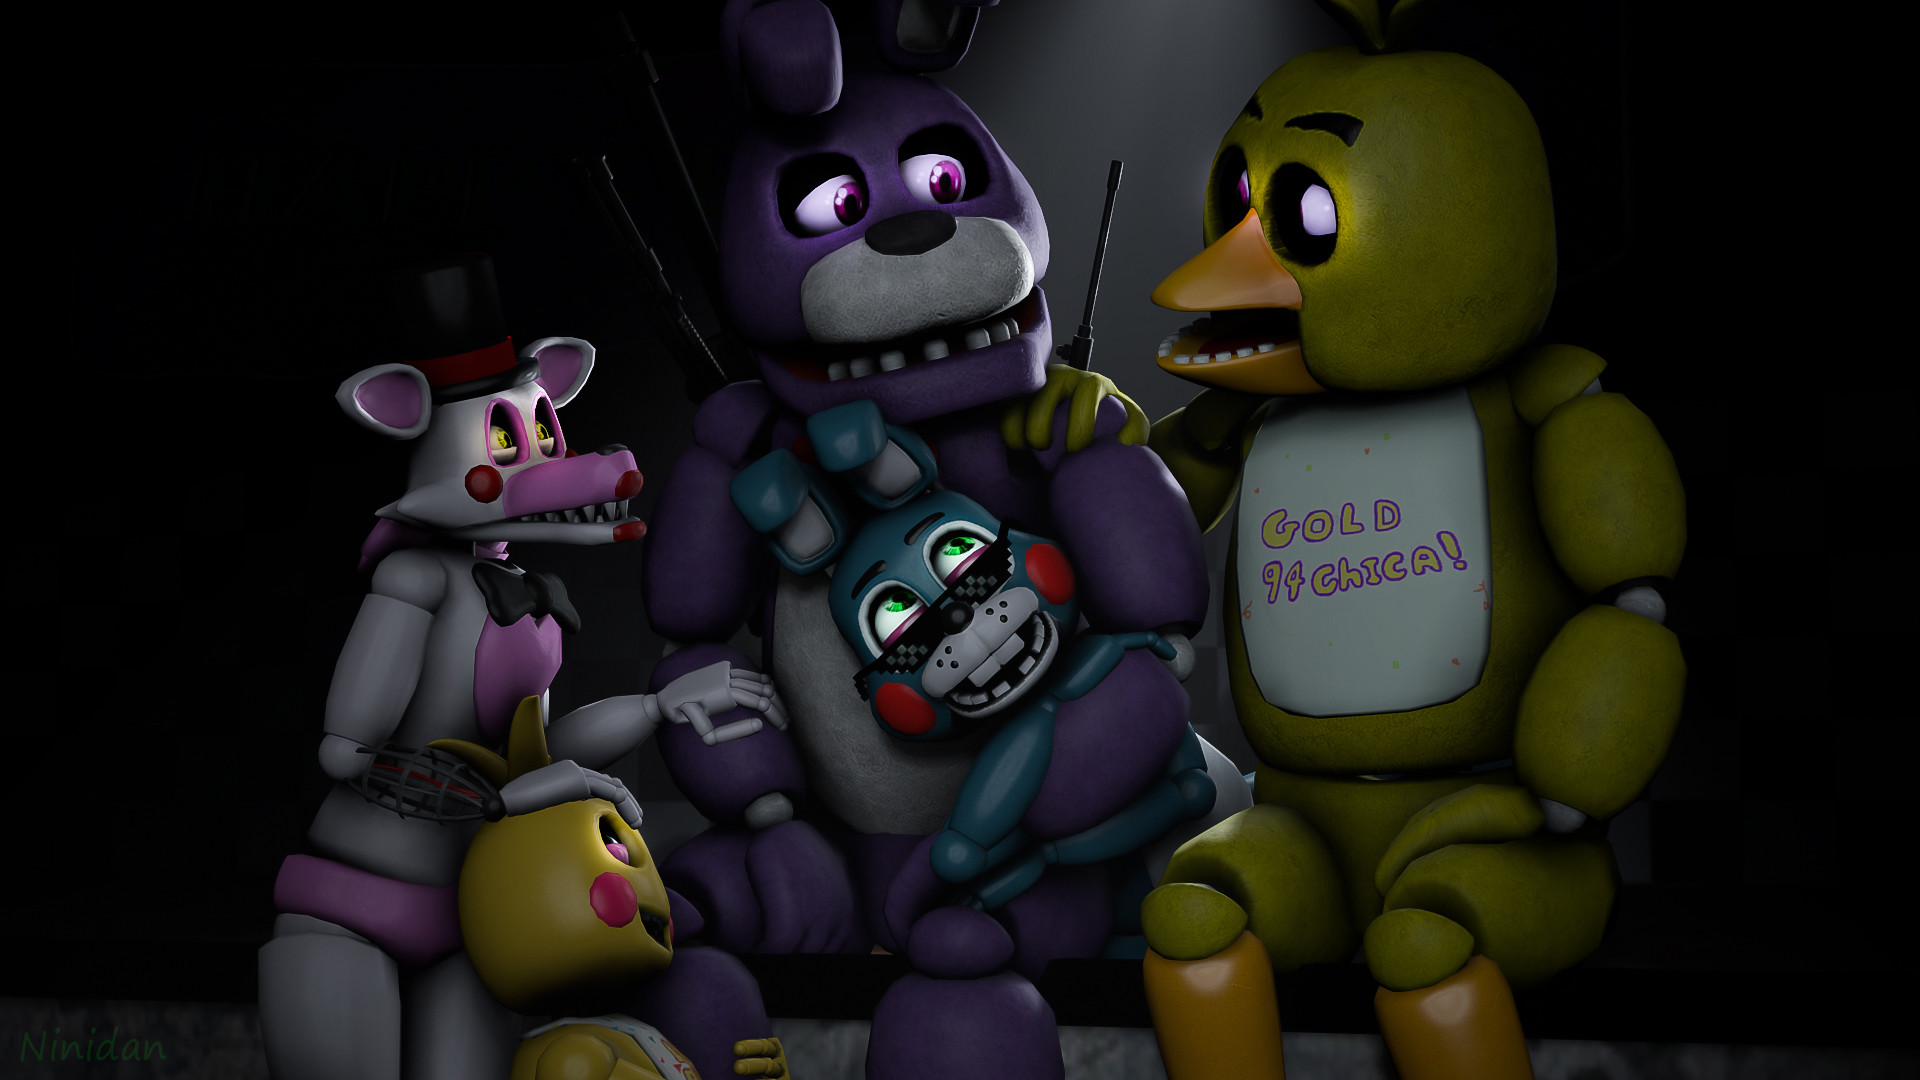 1920x1080 Five Nights at Freddy's images true friends sfm by ninidan d8uqd59 HD  wallpaper and background photos